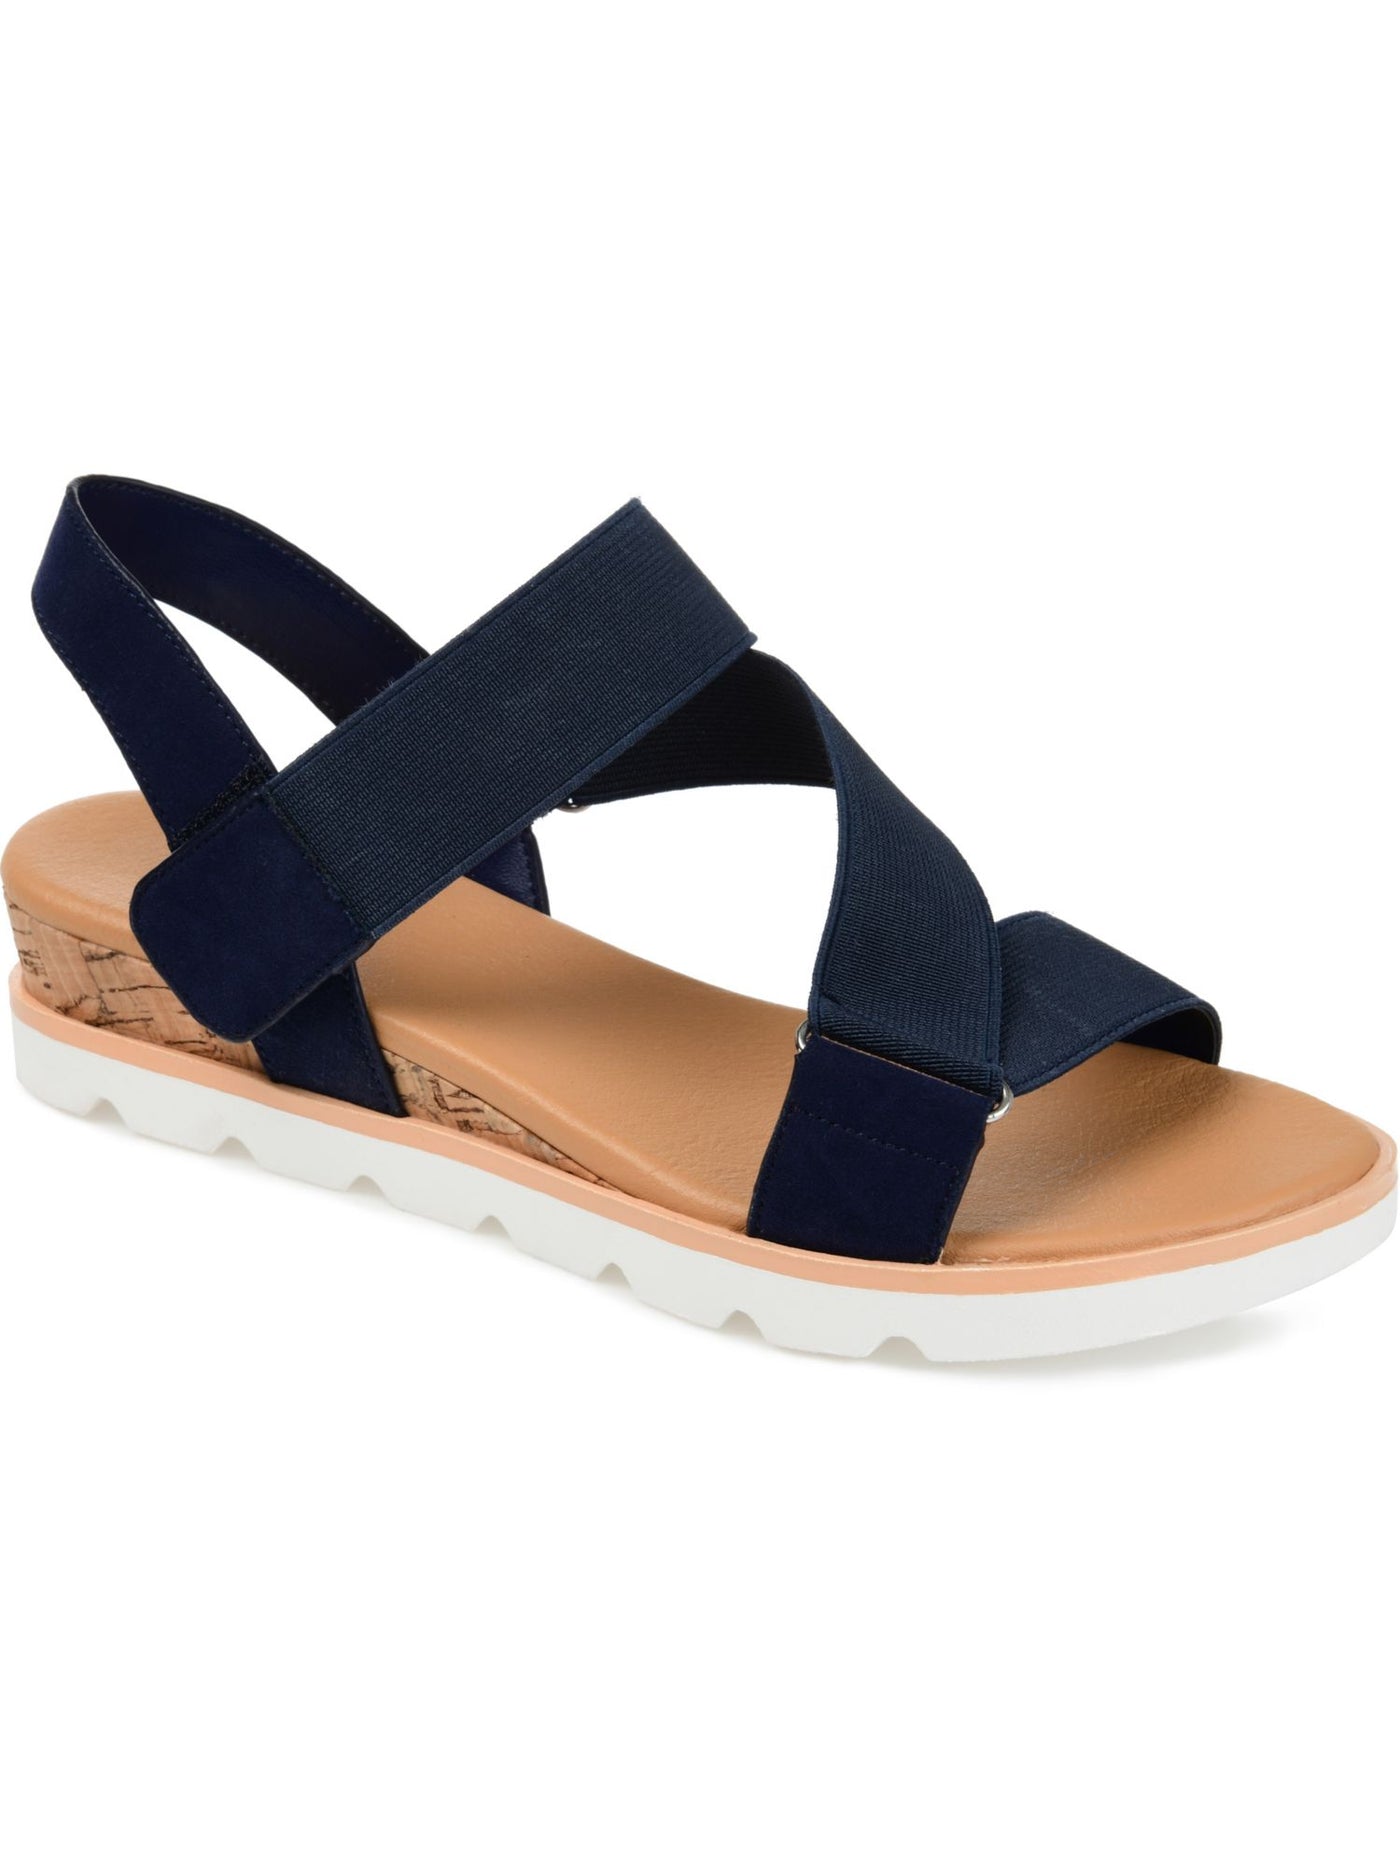 JOURNEE COLLECTION Womens Navy Cork Treaded Stretch Adjustable Strappy Sammi Round Toe Wedge Slingback Sandal 8.5 M